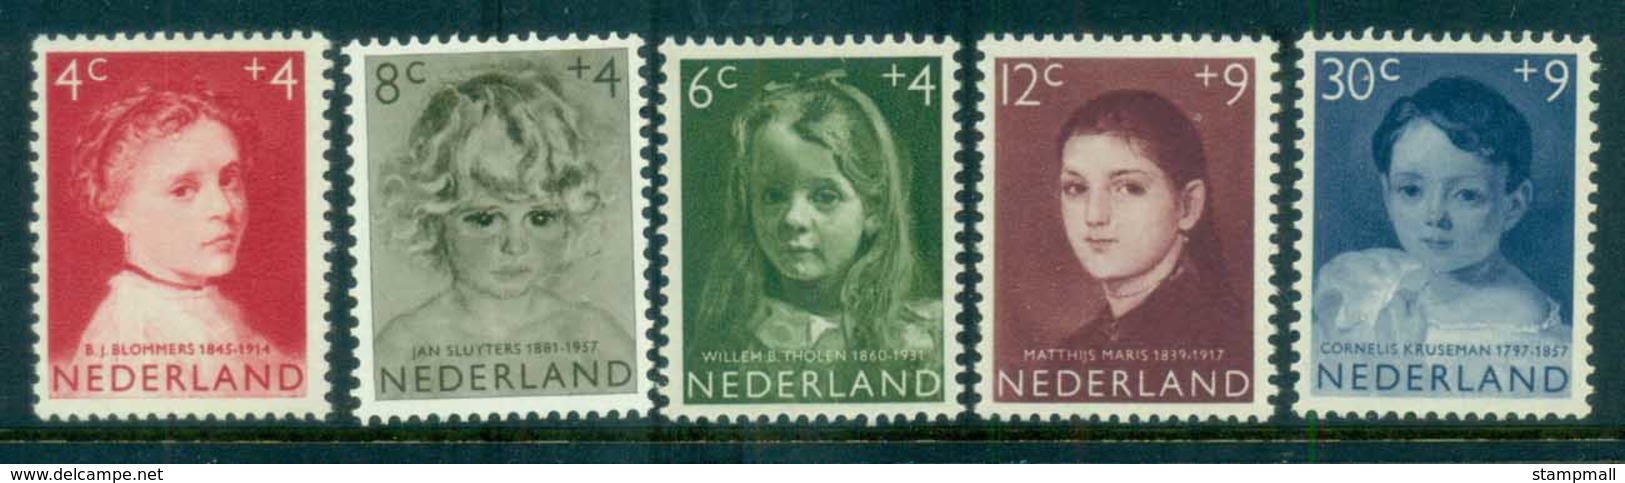 Netherlands 1957 Charity, Child Welfare MLH Lot76512 - Unclassified